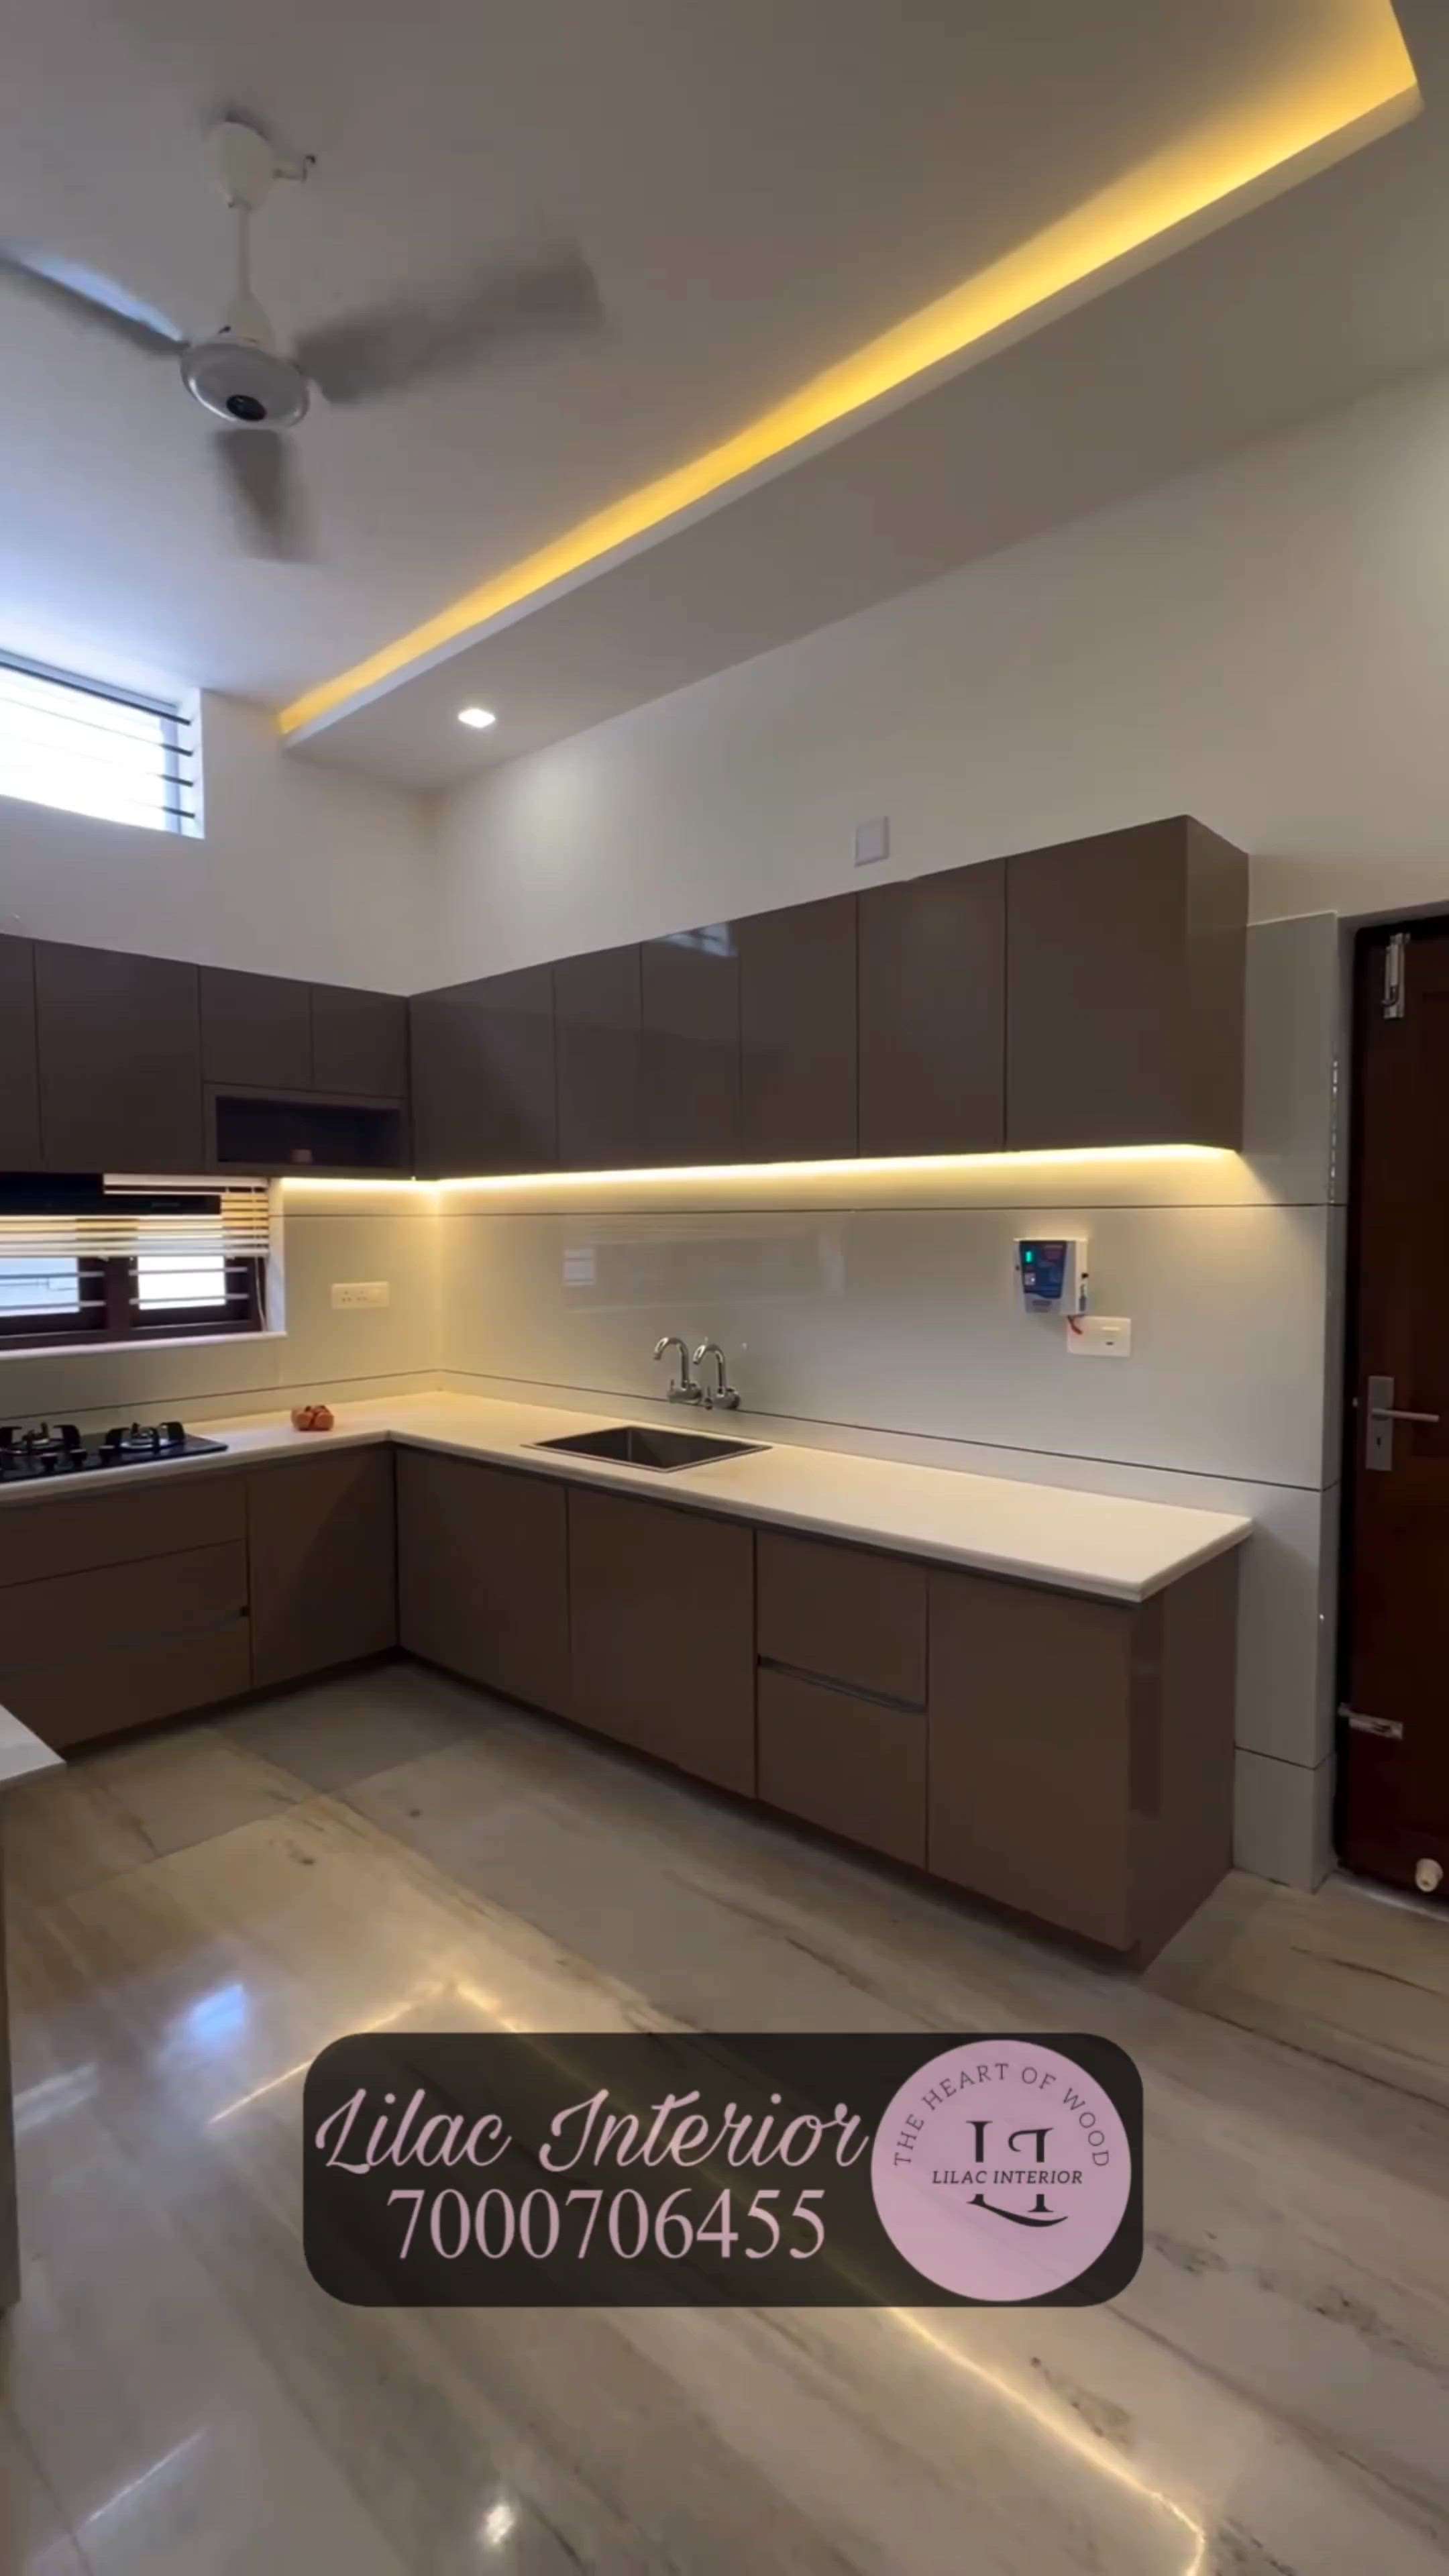 Latest Kitchen Made by Lilac Interior ❤️🤩

📞Contact for work - 7000706455 , 7701821801, 9889720650

📩 Comment or DM ' smart ' to order
💻 https://lilacinterior.com

Looking for one-stop interior design solutions for your dream home or office? 😍
At Lilac Interior, we don't just build homes but craft your desires into fresh designs to make you fall in love with your home! ✨
Get your dream home designed by us 💫

Follow on Instagram : @lilacinterior.official

#kitchendecor #kitchendesign #kitchen #homedecor #interiordesign #interior #kitcheninspo #kitchenremodel #home #kitcheninspiration #decor #kitchenrenovation #design #kitchenware #kitchensofinstagram #kitchenideas #kitchengoals #homedesign #homesweethome #kitchenisland #kitchencabinets #interiors #kitchenset #handmade #kitchens #interiordesigner #architecture #kitcheninterior #k #cooking